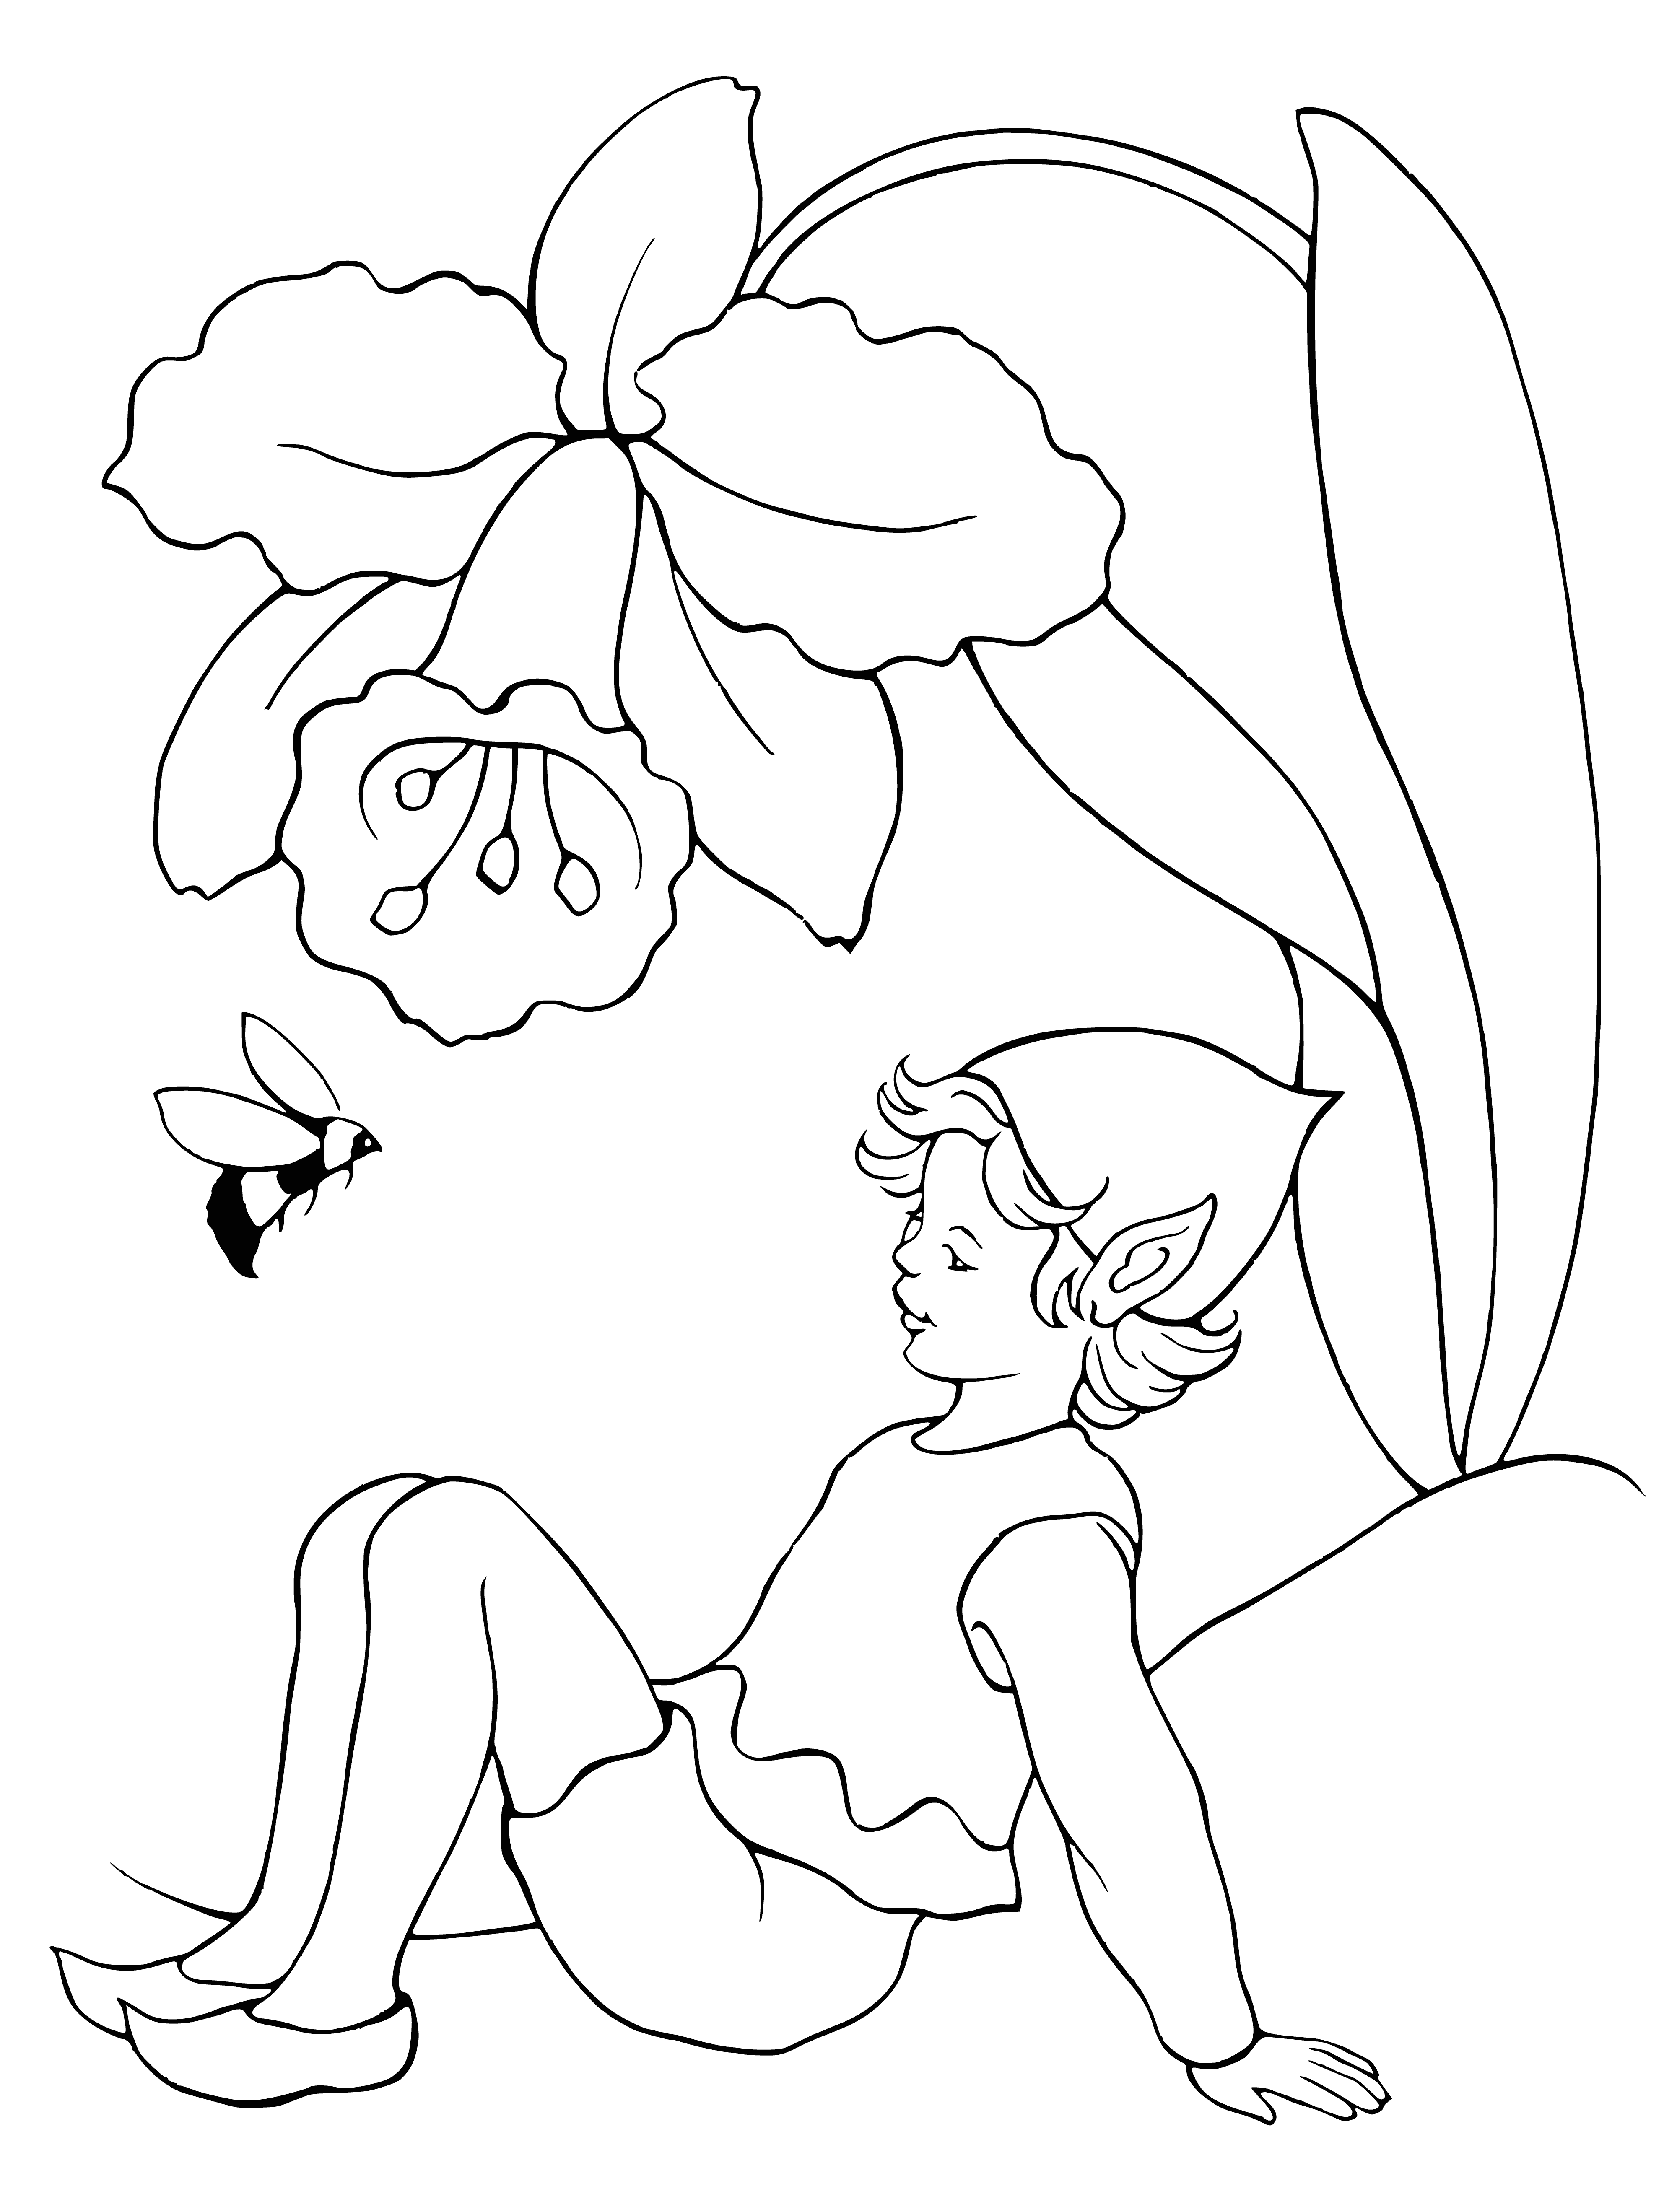 Elf and bumblebee coloring page